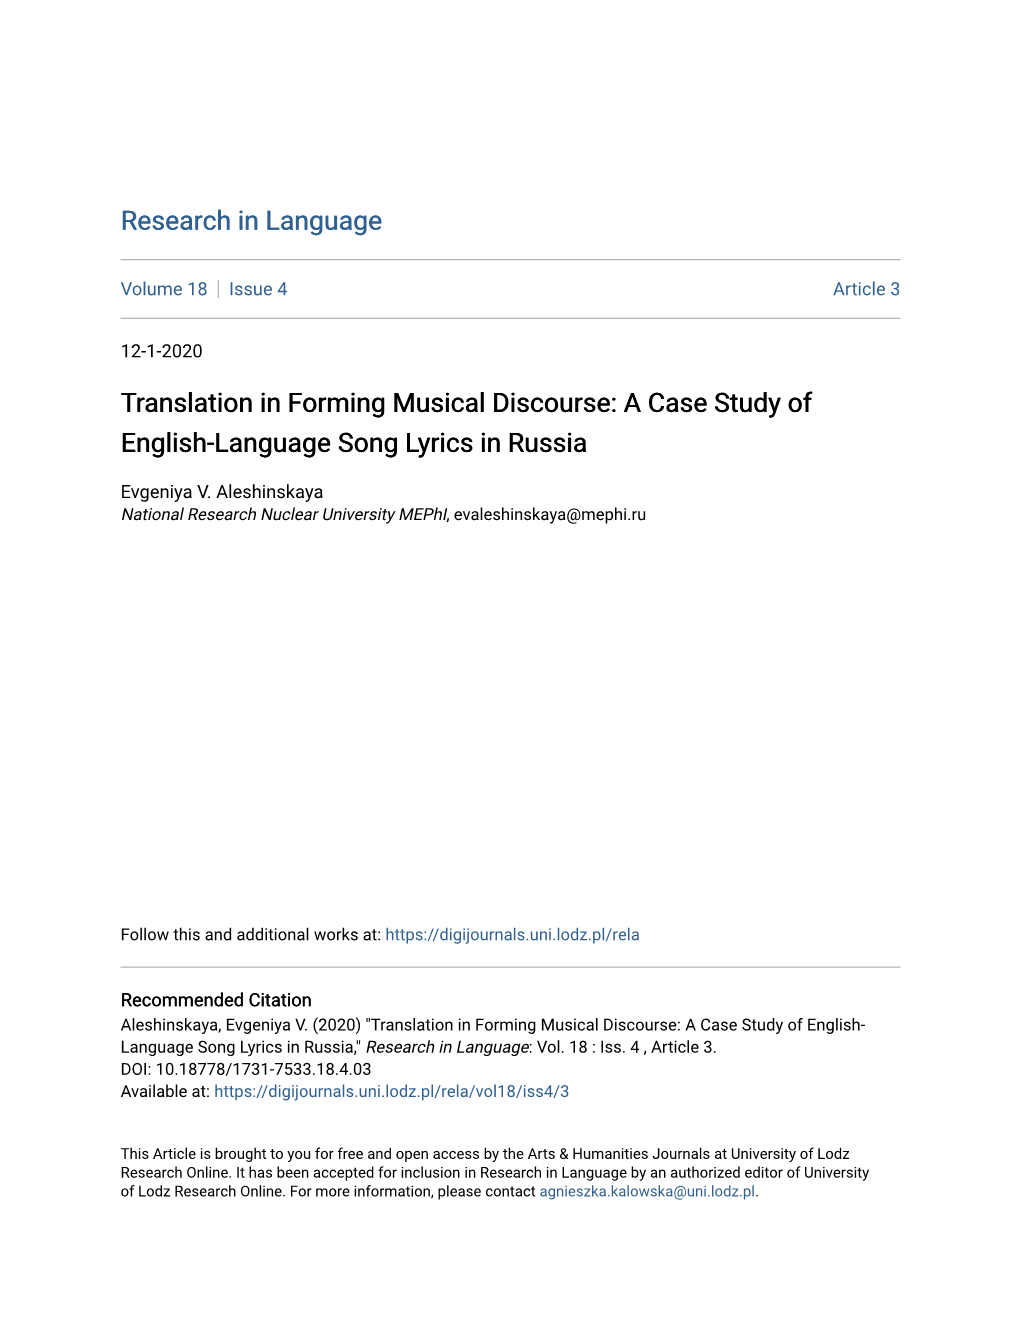 Translation in Forming Musical Discourse: a Case Study of English-Language Song Lyrics in Russia